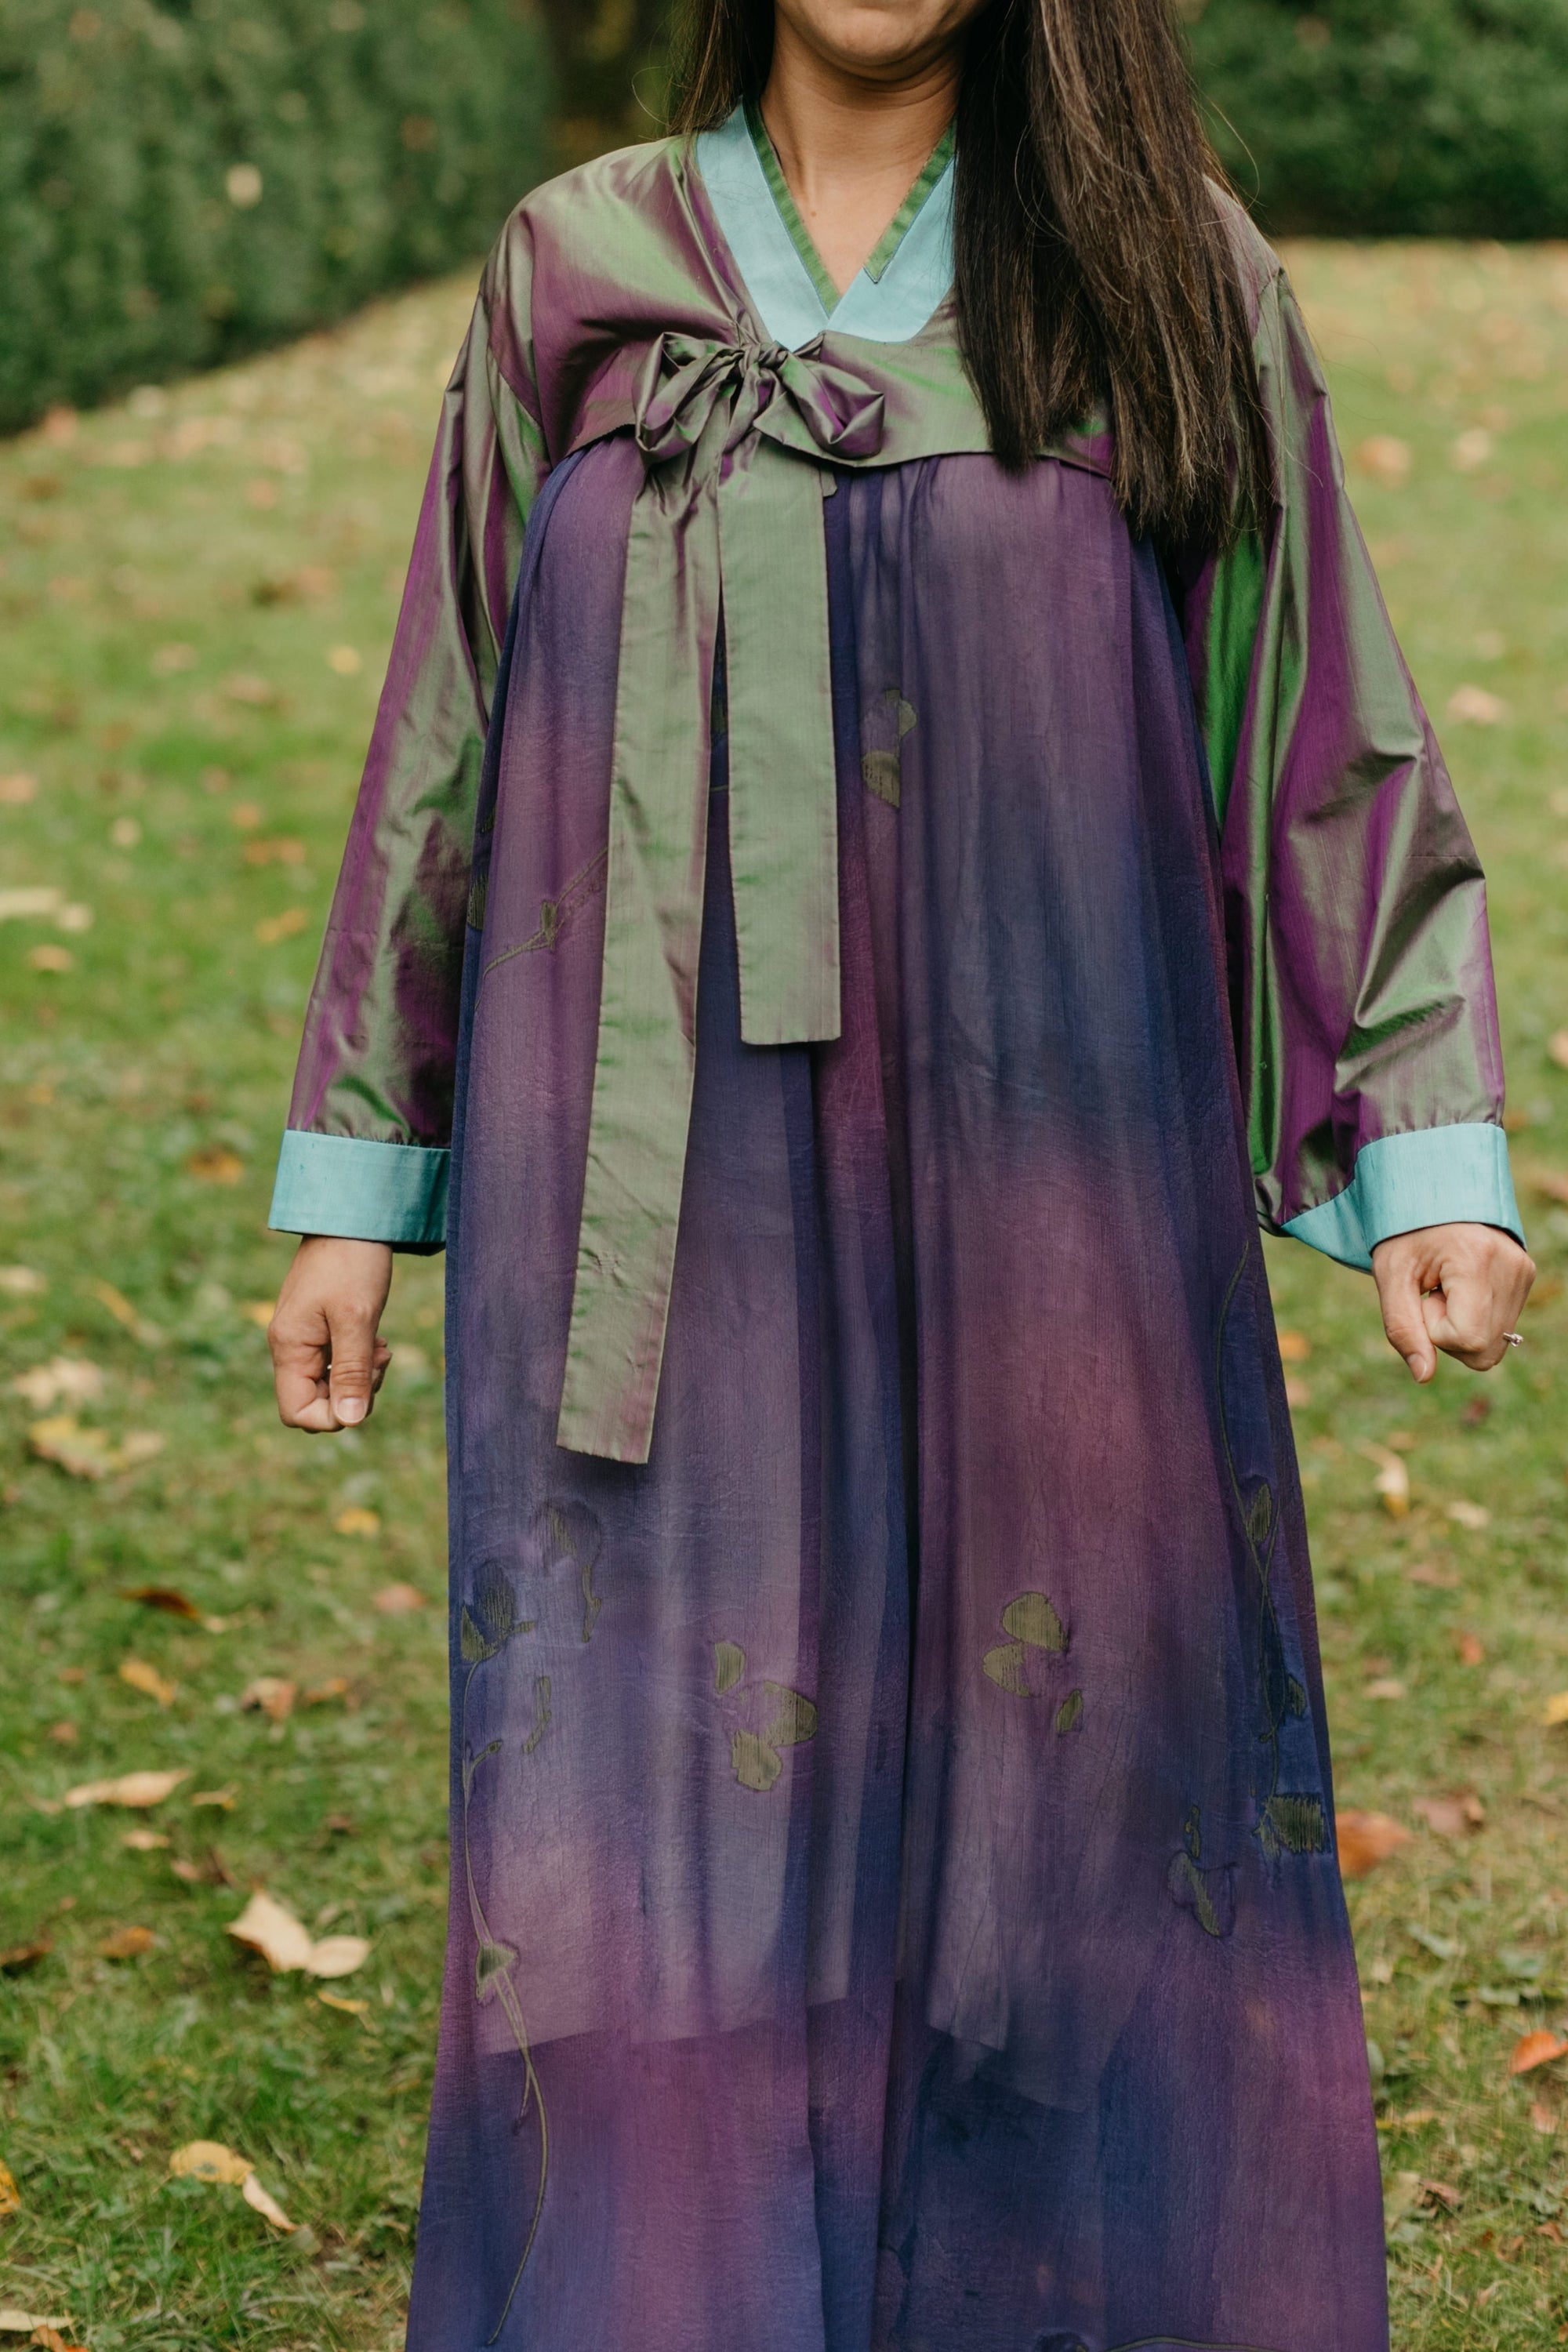 Woman wearing a purple shot silk han bok dress and jacket. Jacket is of teal and green shot silk and tied in the front. She is outside in a lawn.  Photo is close up of the front of the hanbok..